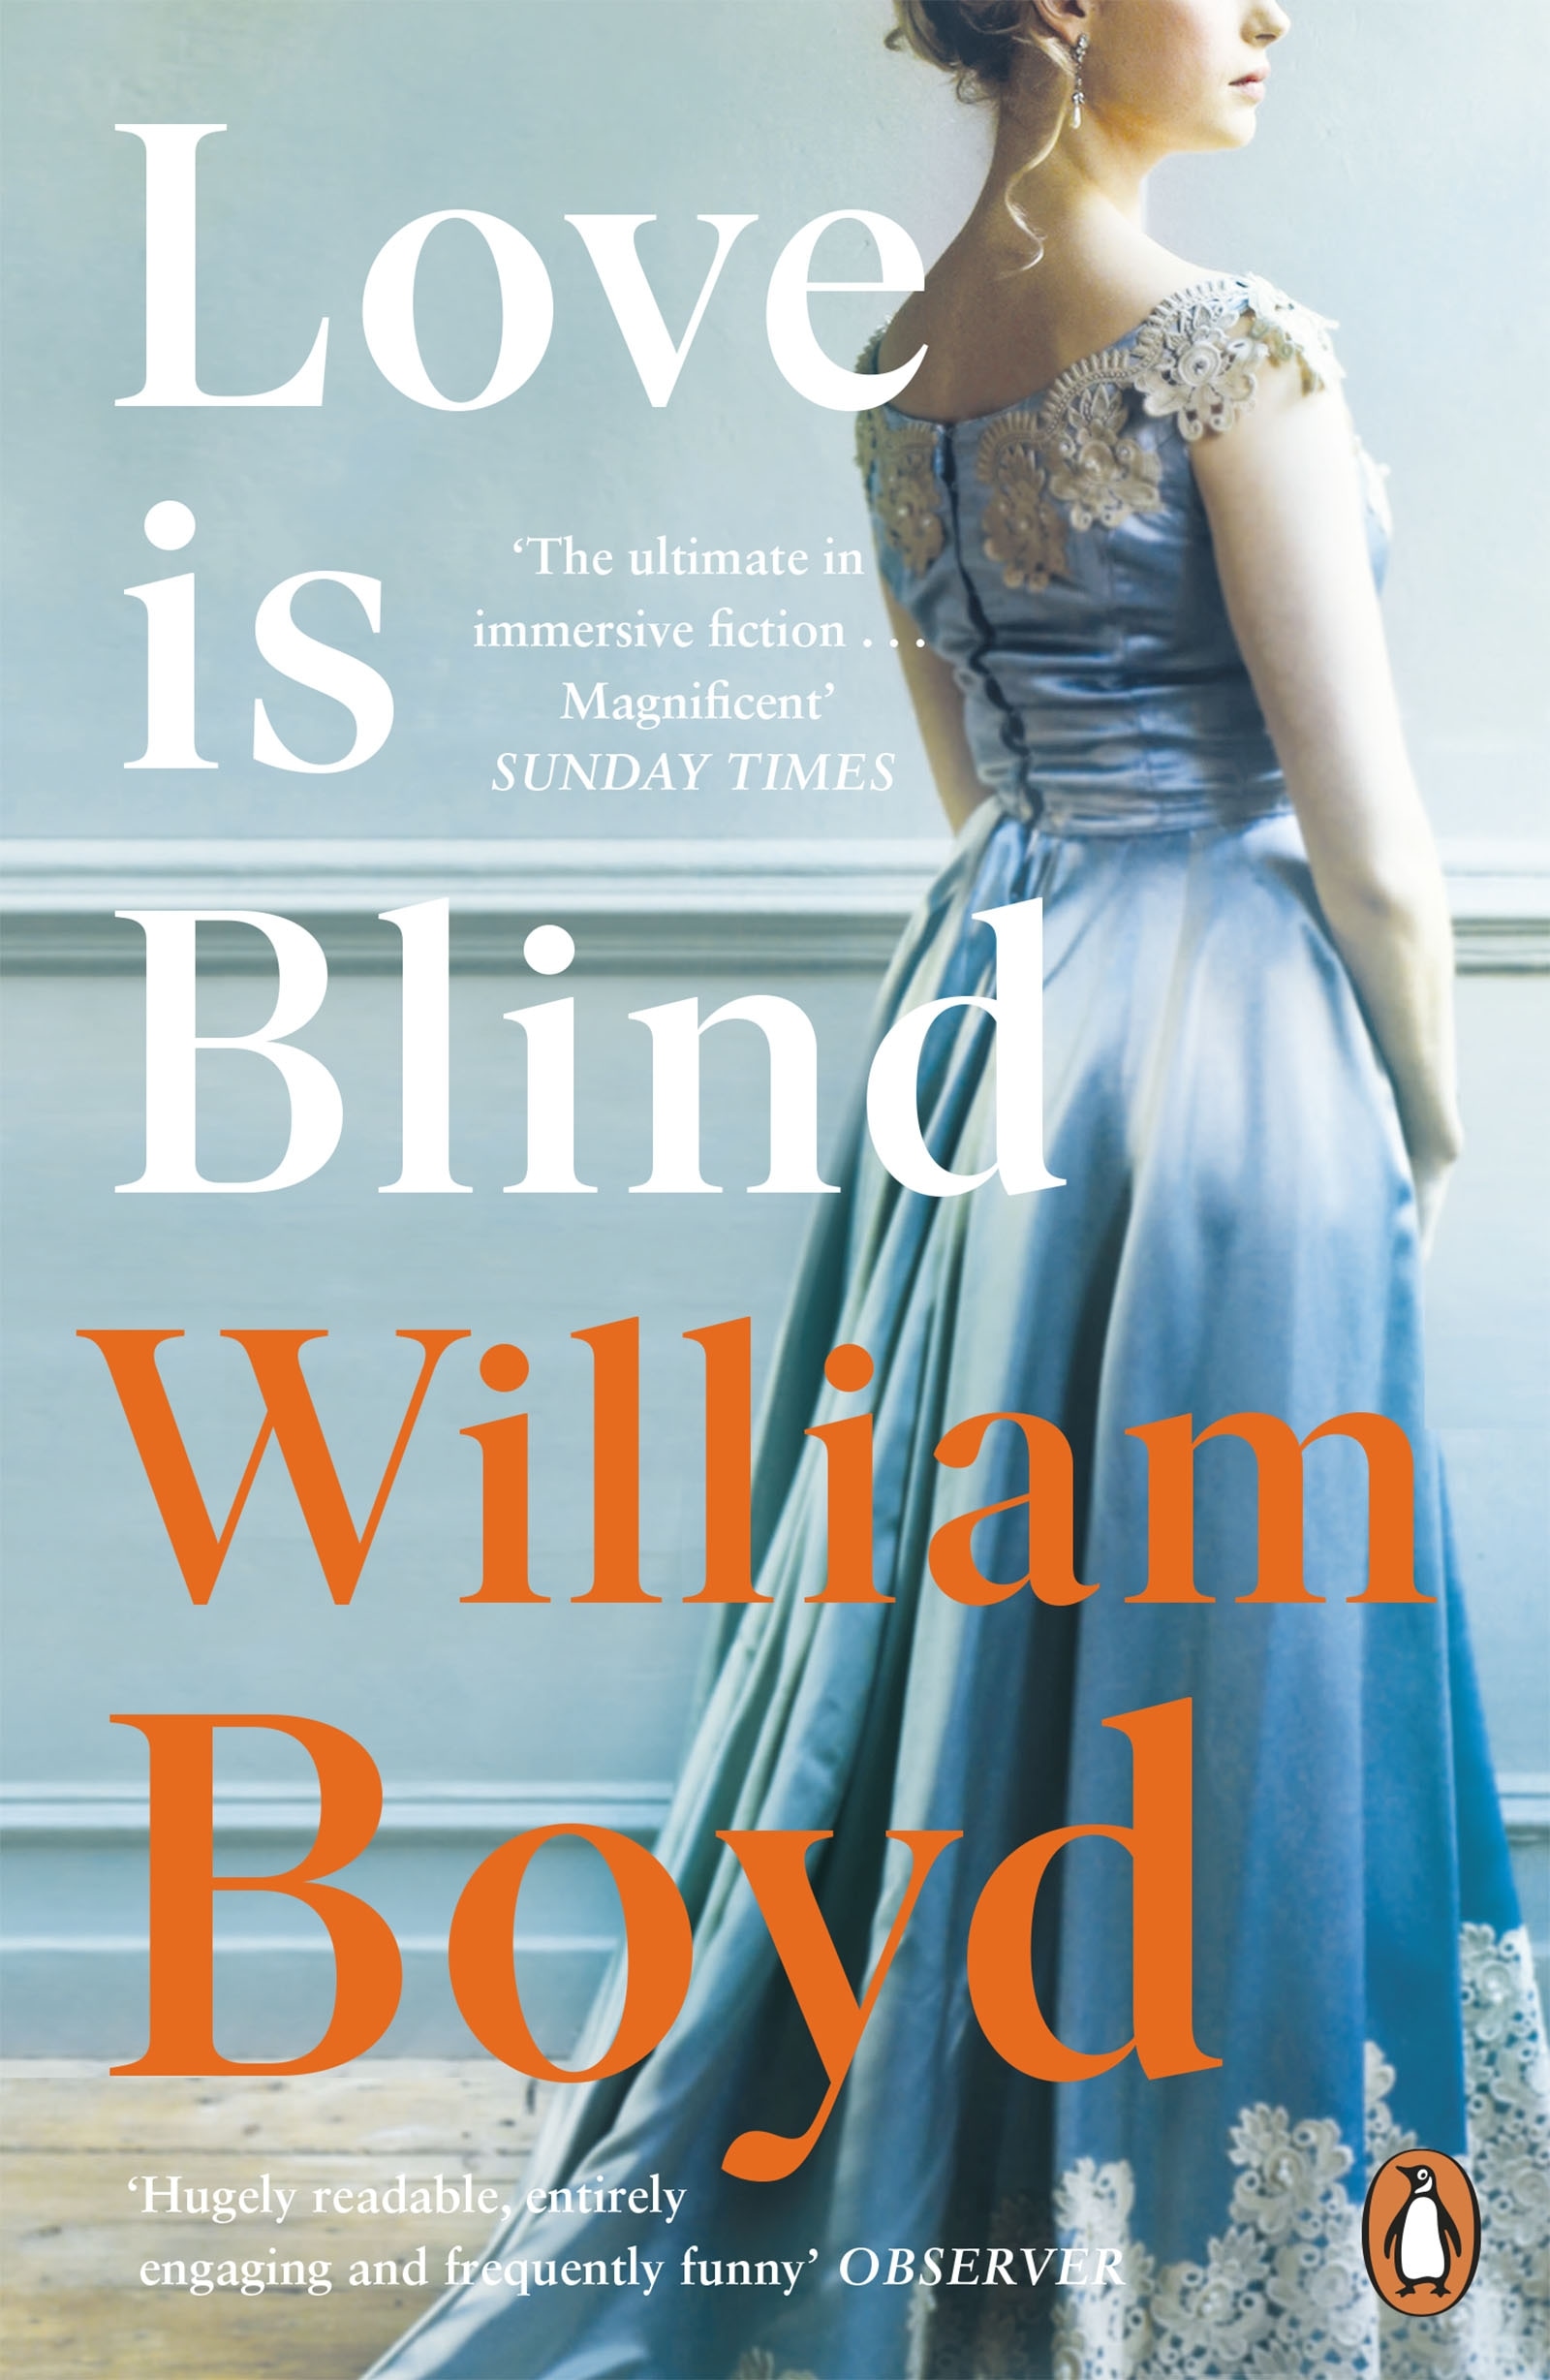 Book “Love is Blind” by William Boyd — May 2, 2019